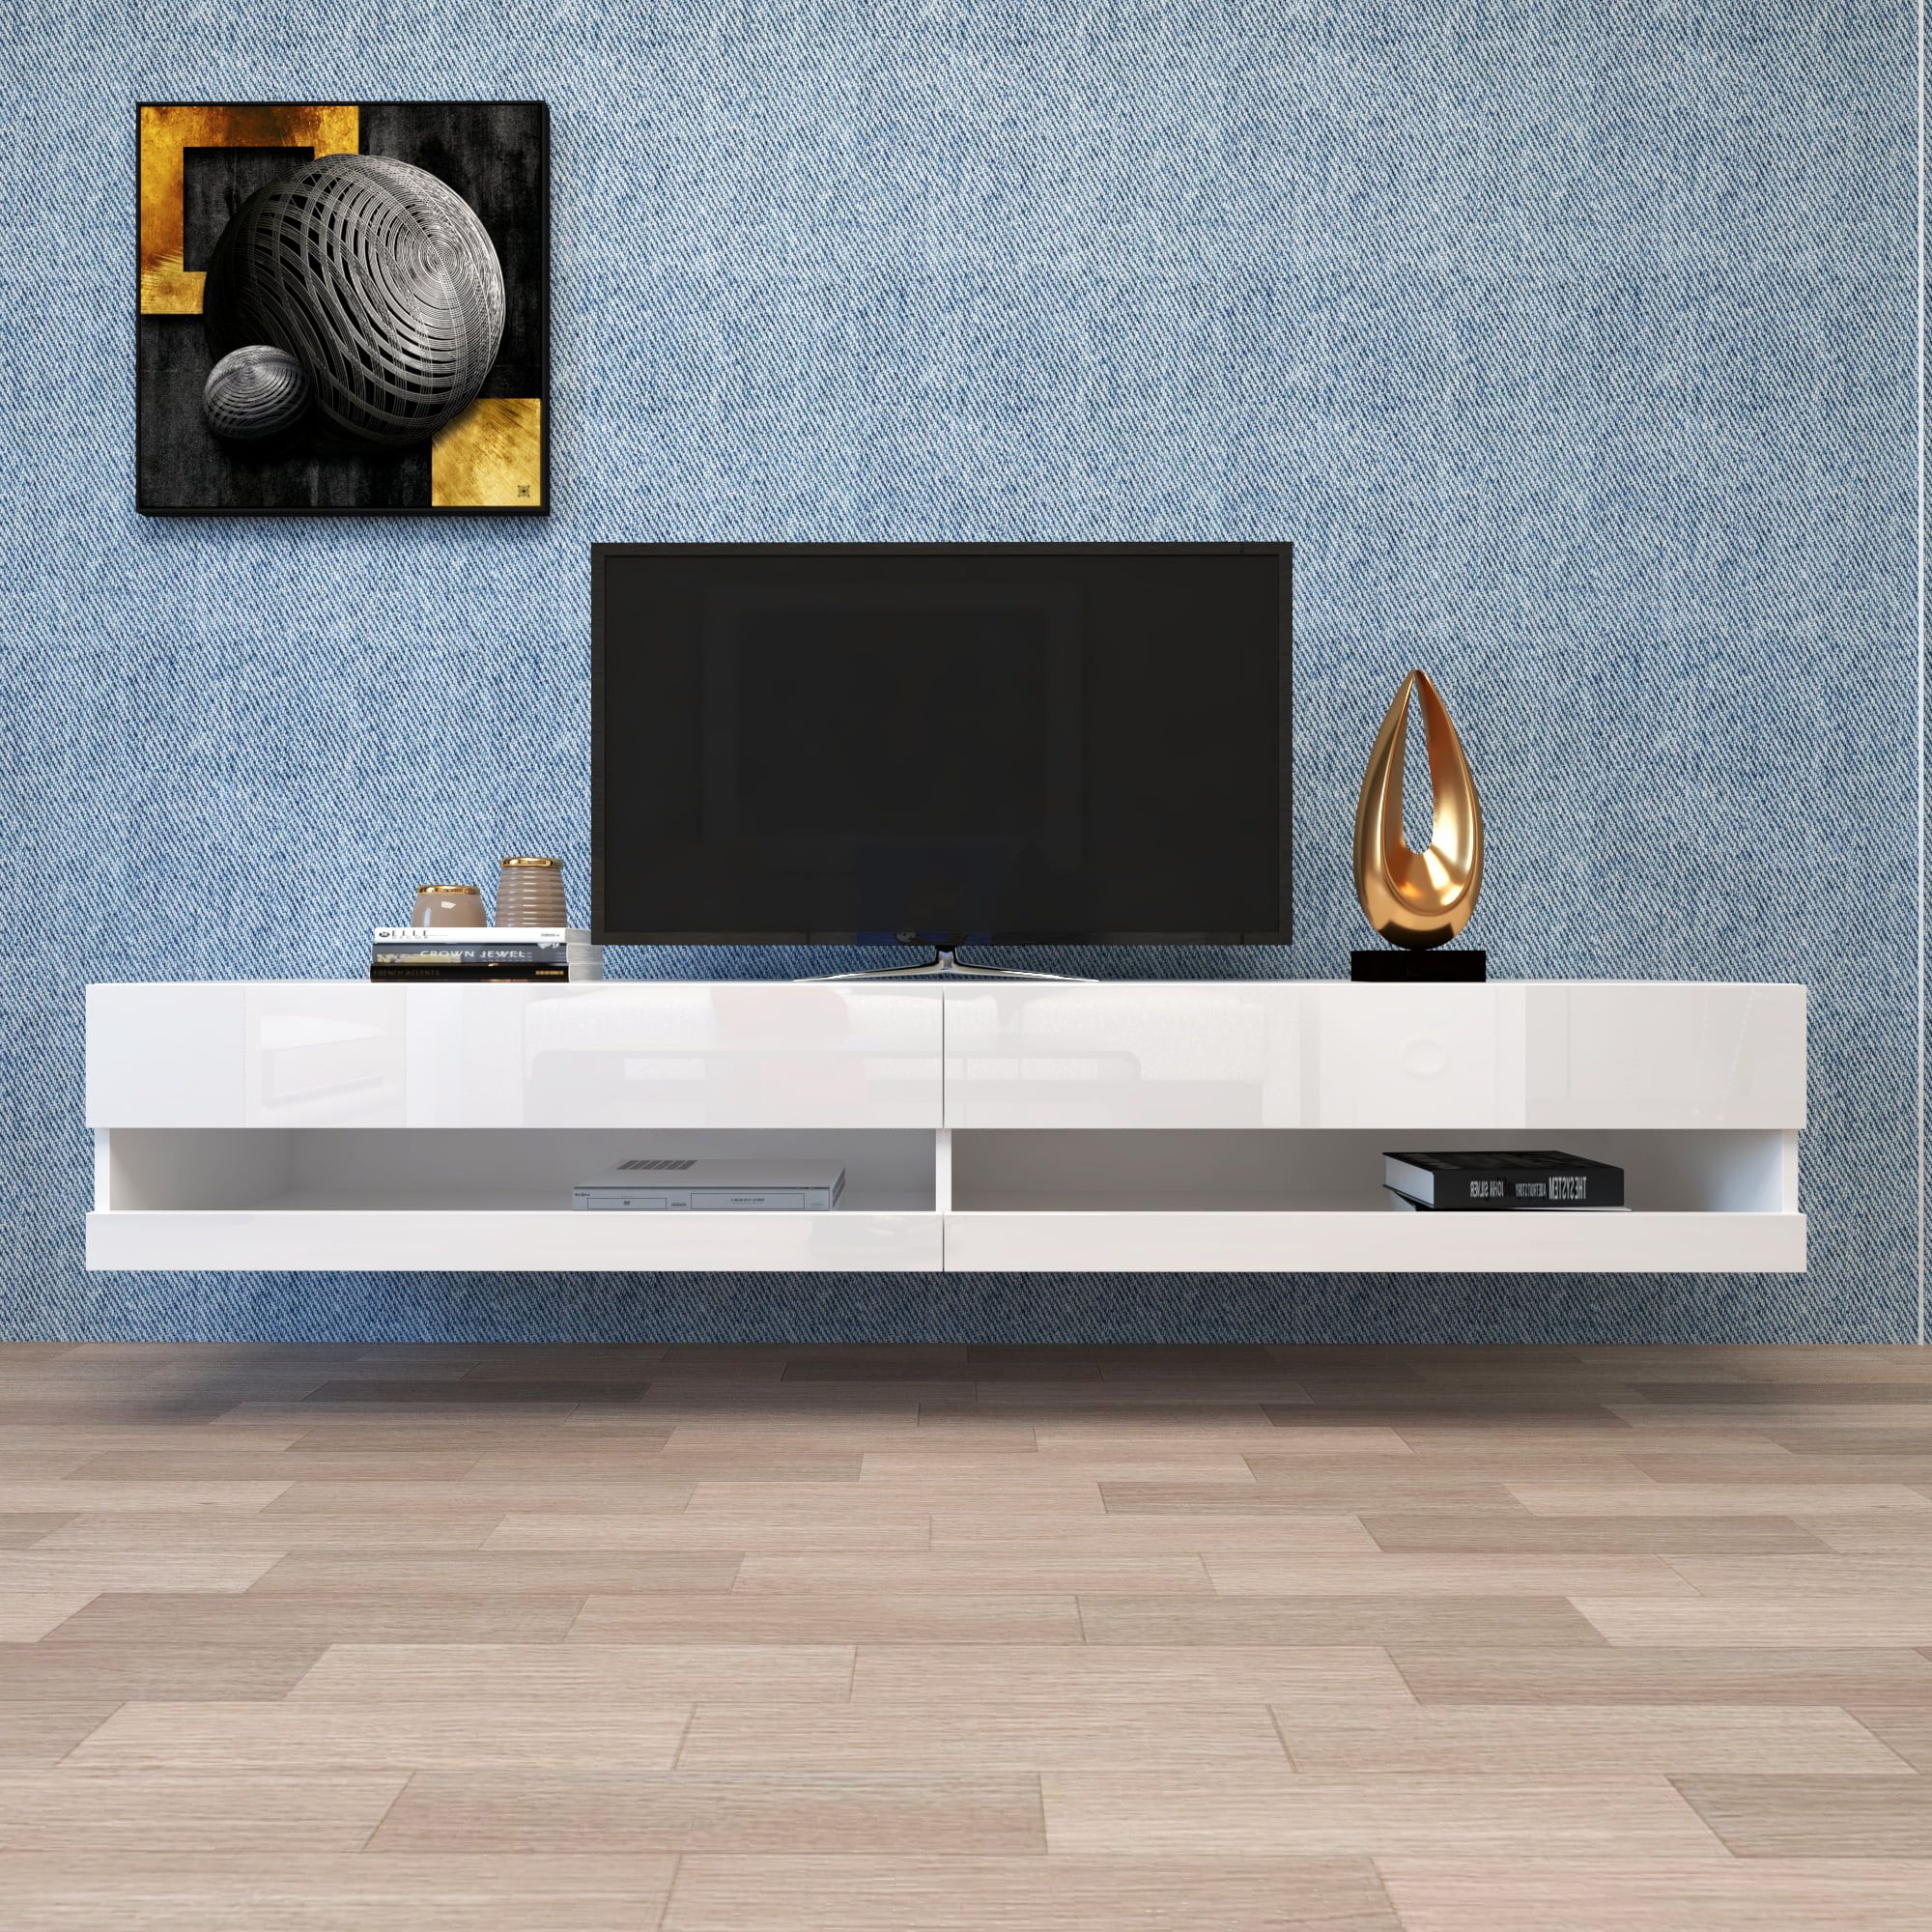 White Wall Mounted Tv Stand, Segmart Led Tv Cabinet For 80 Inch Tv In Wall Mounted Floating Tv Stands (View 14 of 20)